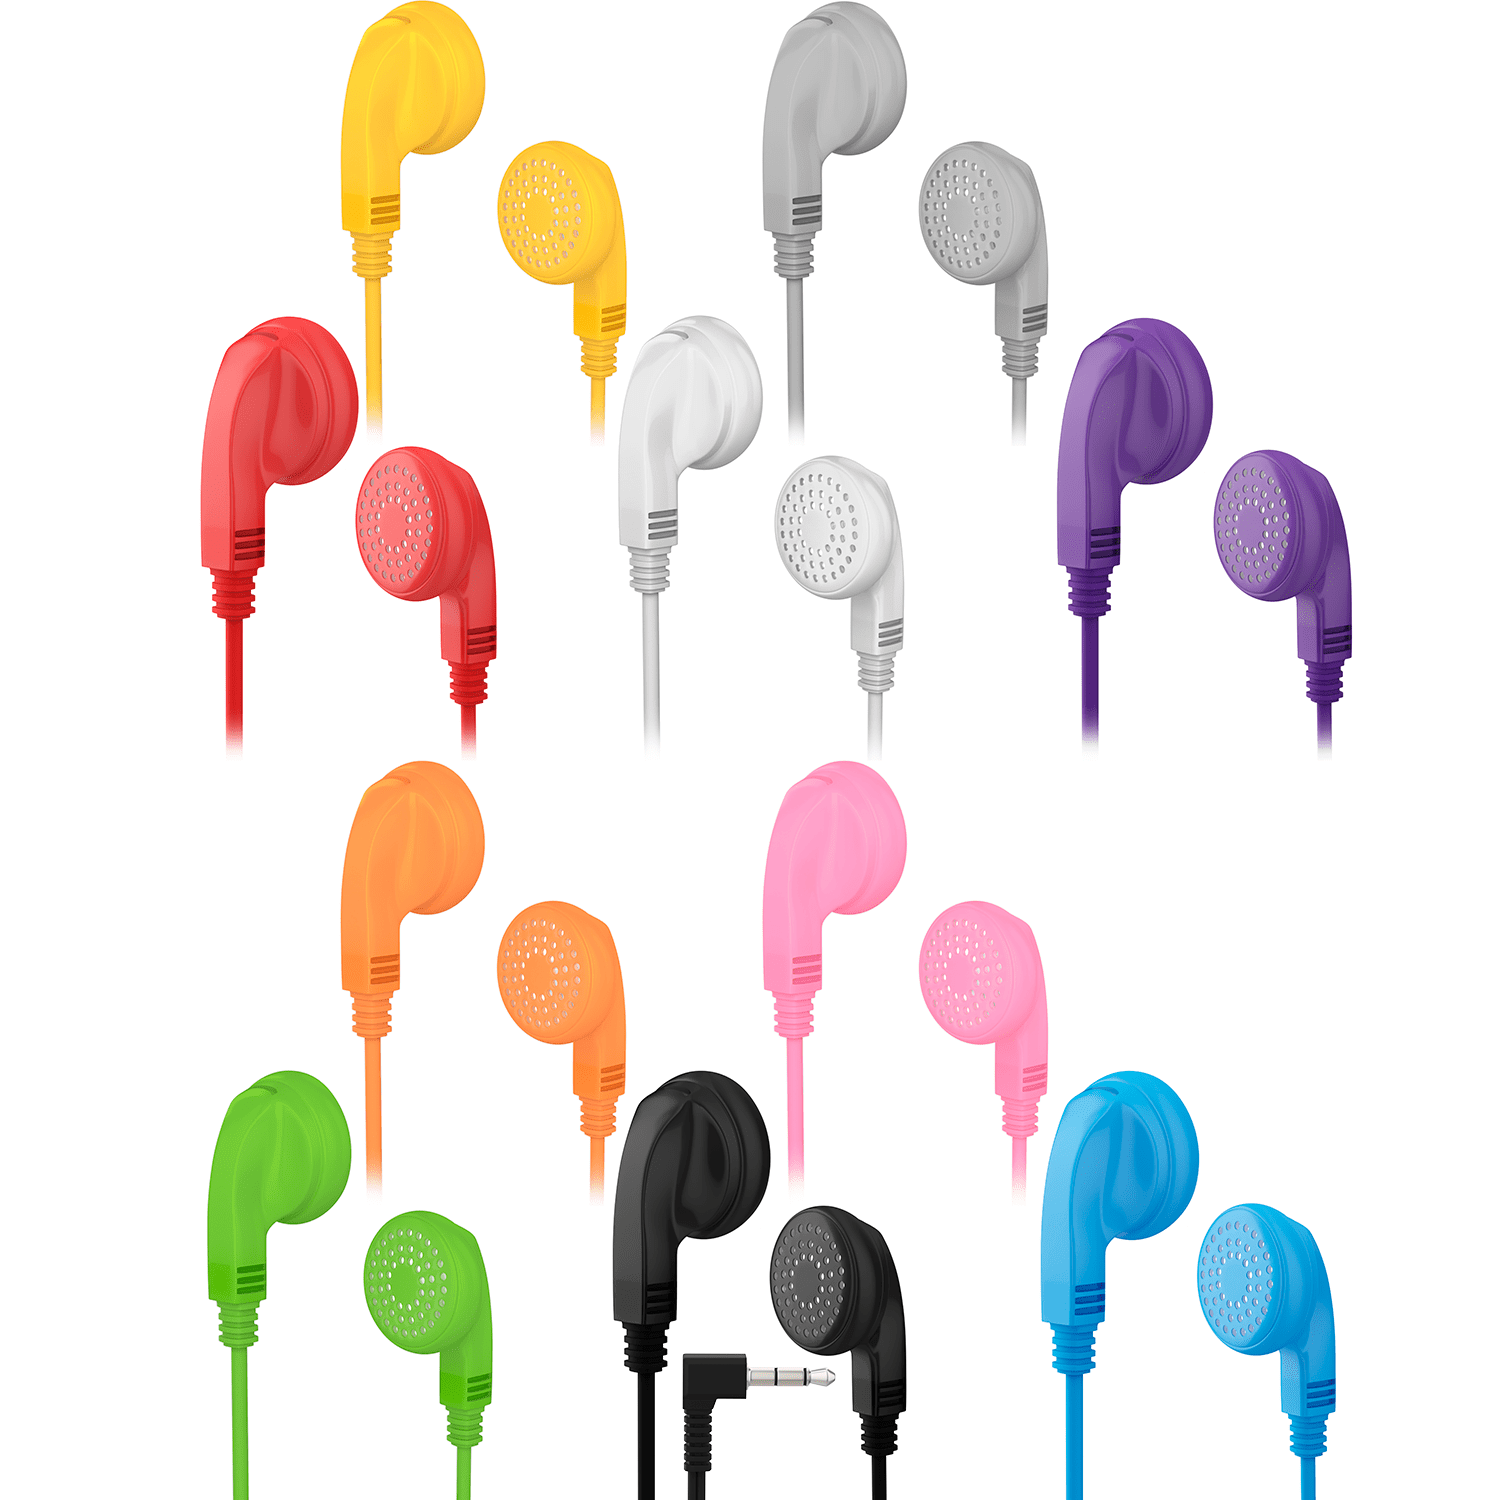 10 Pack Earbuds Headphones - School / Library / Office Supplies Wholesale  Bulk Replacement Earphone Earbuds for Kids, Adults - Individually Bagged  Gift - Assorted Colors 